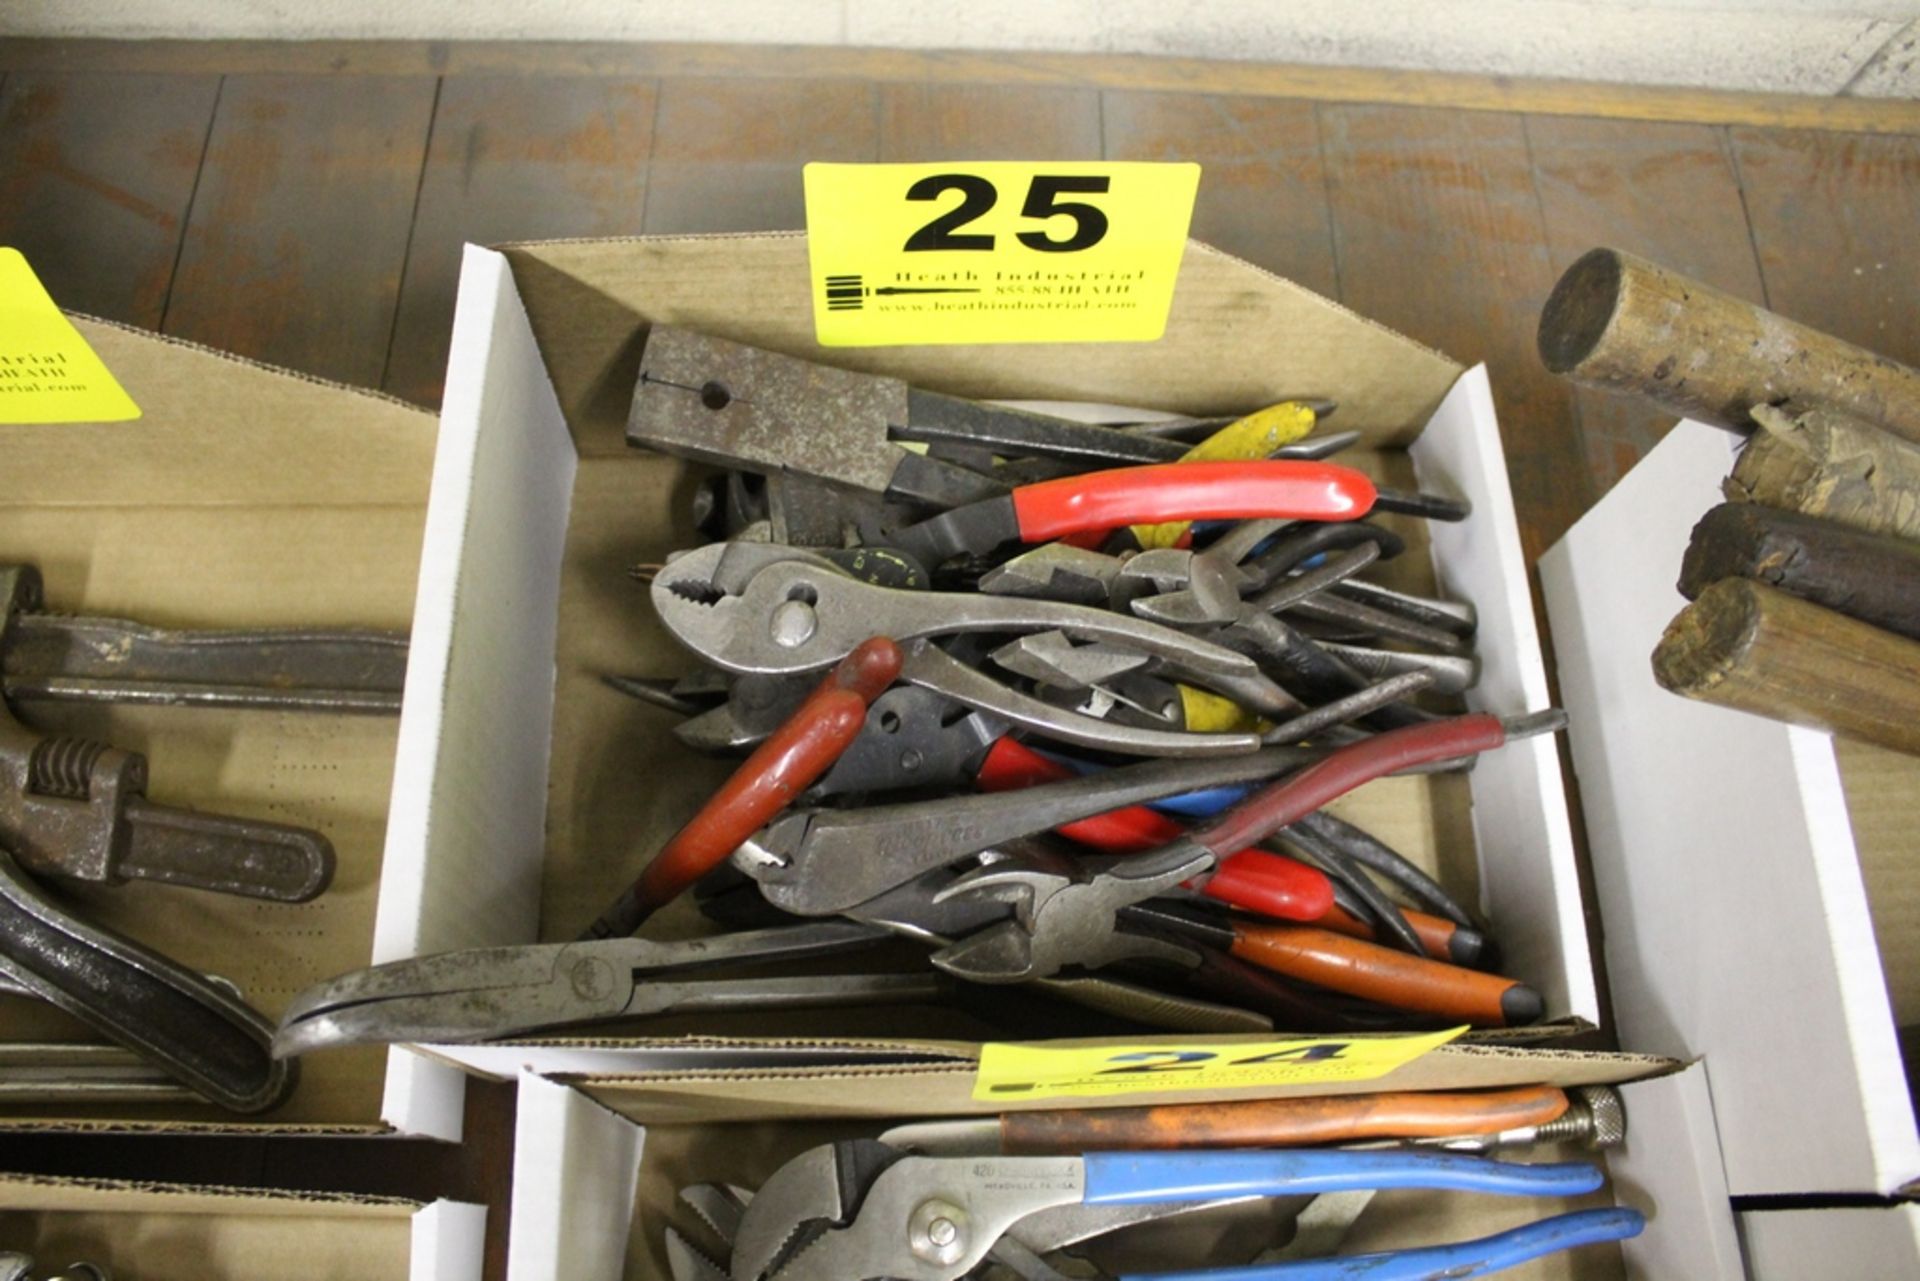 LARGE QTY OF SIDE CUTTERS, PLIERS, NEEDLE NOSE PLIERS, ETC.